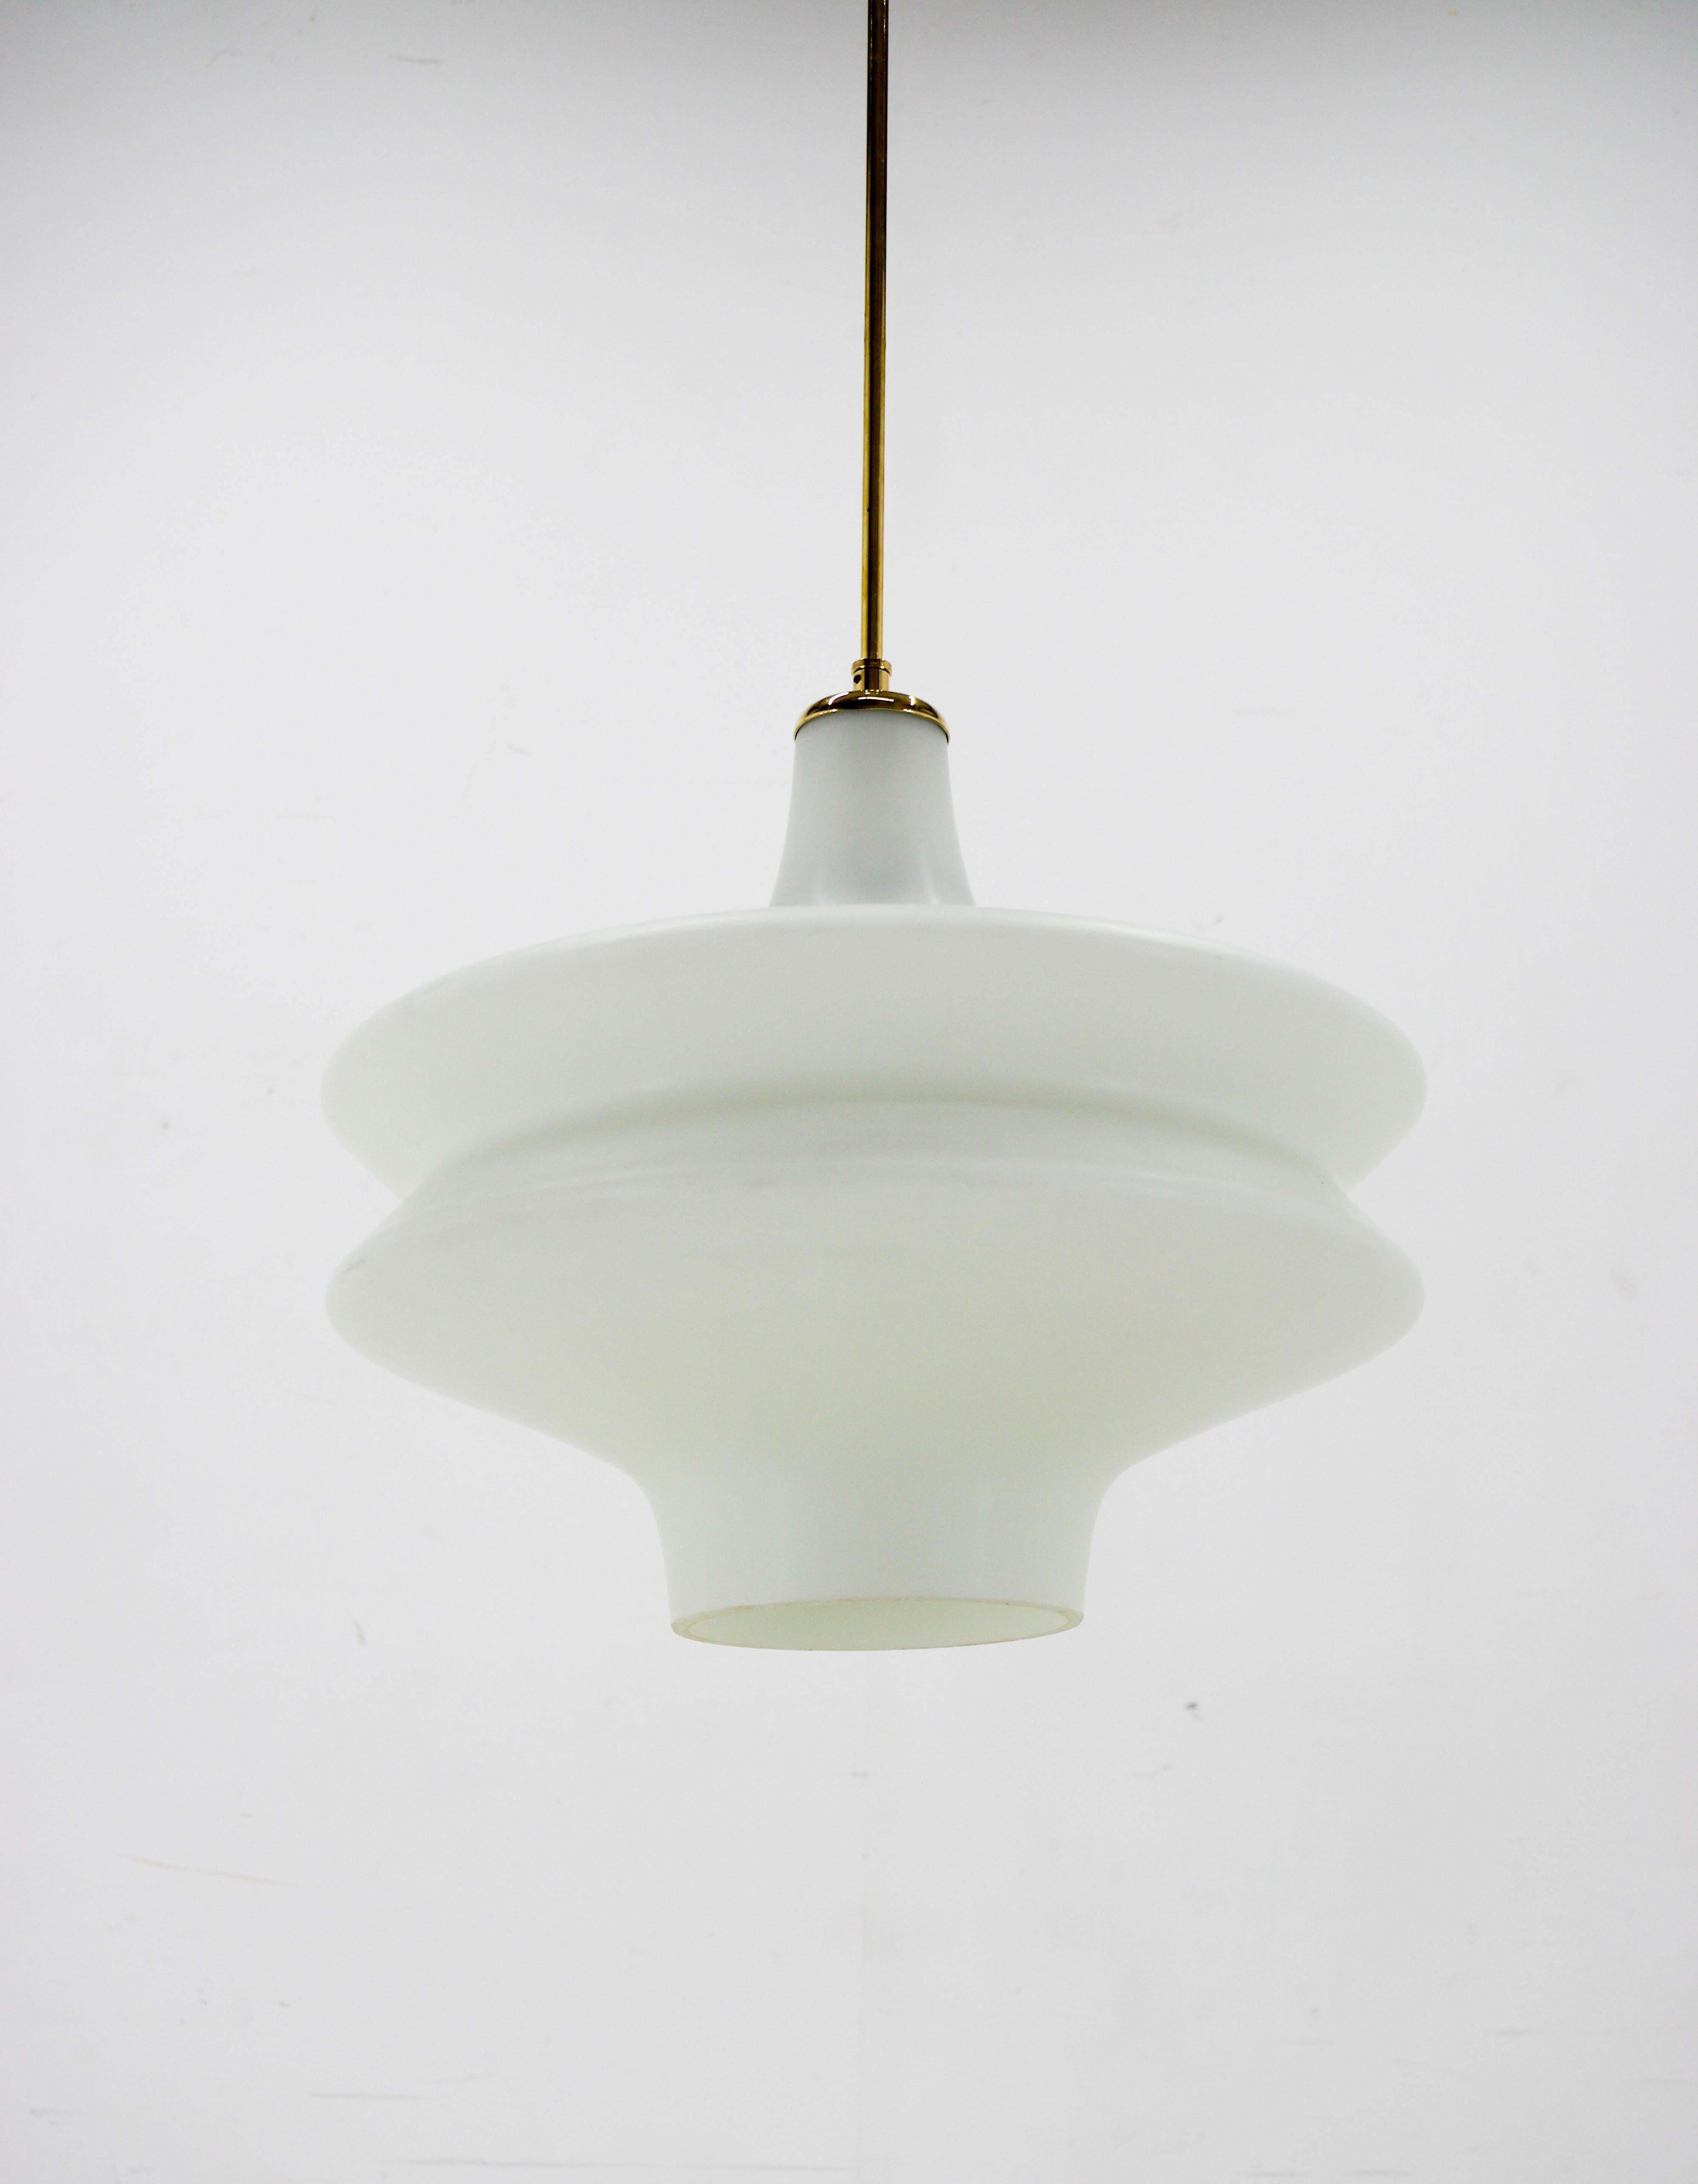 Brass central rod and canopy.
Opaline glass shade.
Rewired
1x100W, E25-E27 bulb
US wiring compatible